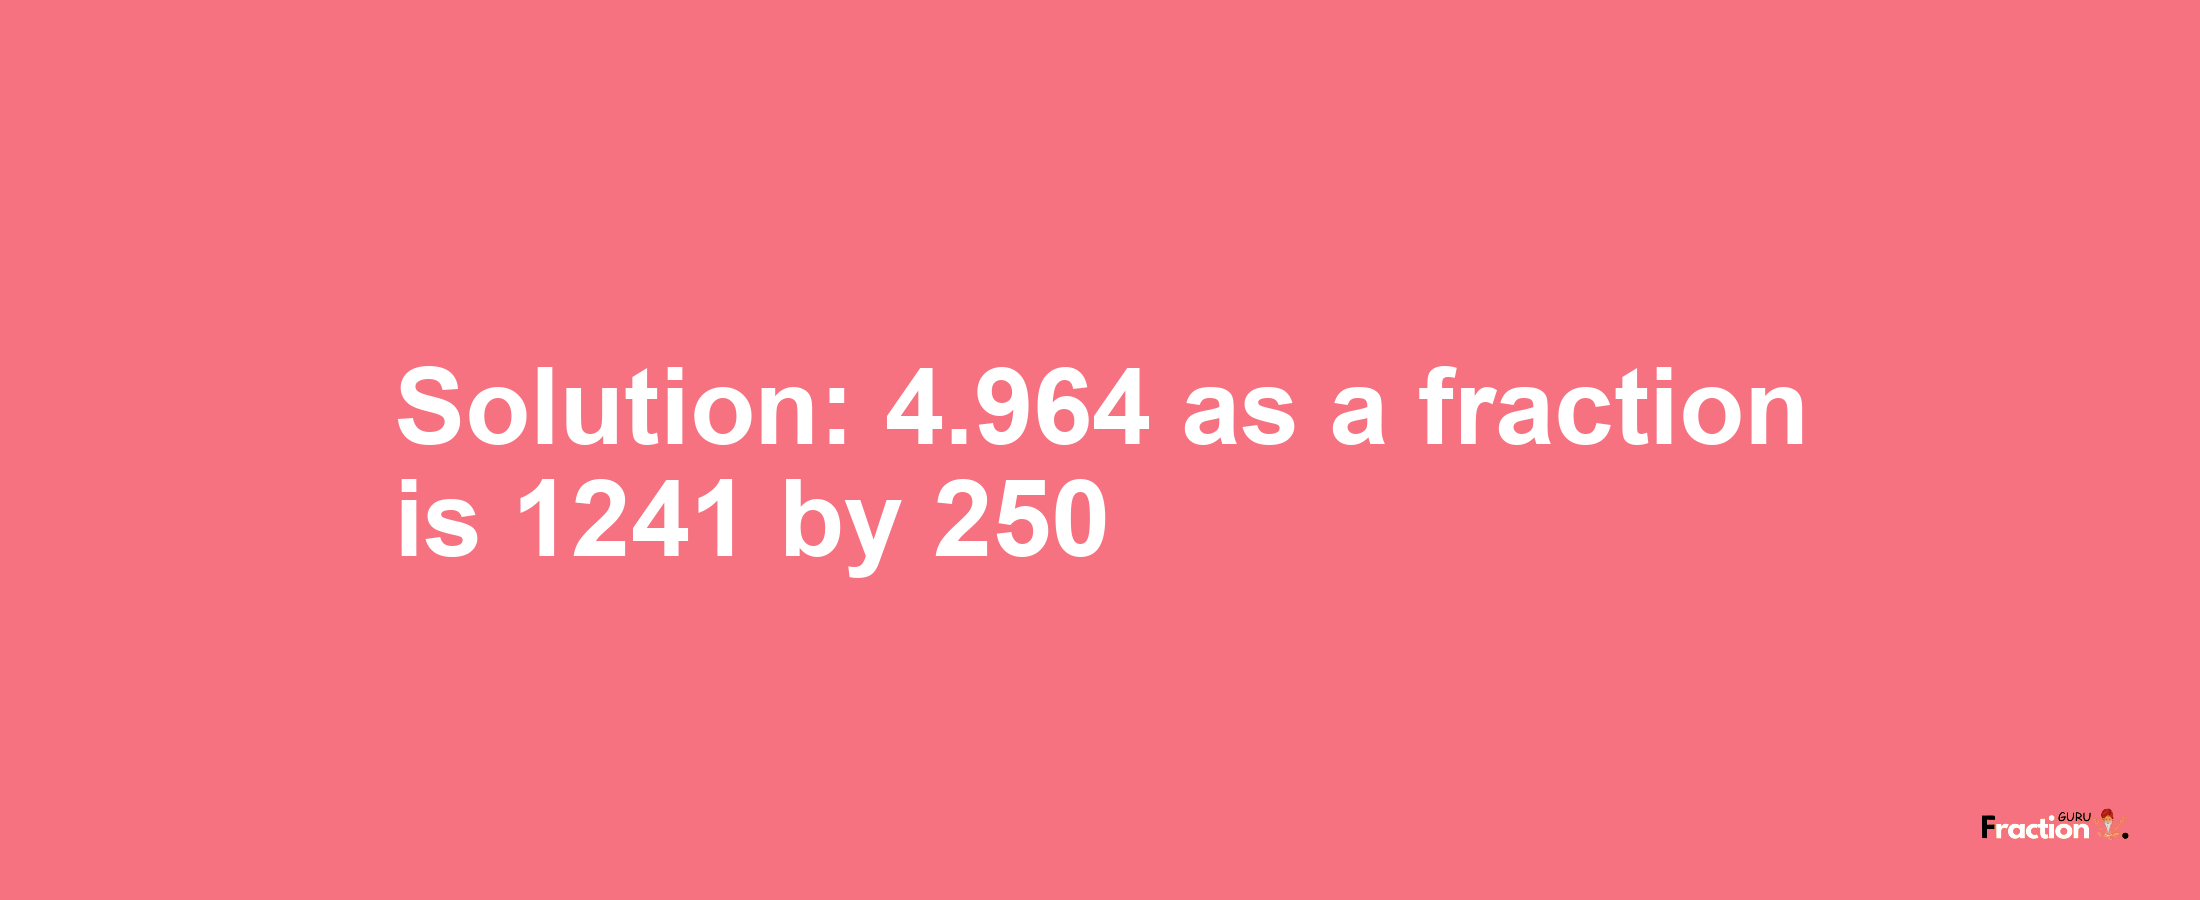 Solution:4.964 as a fraction is 1241/250